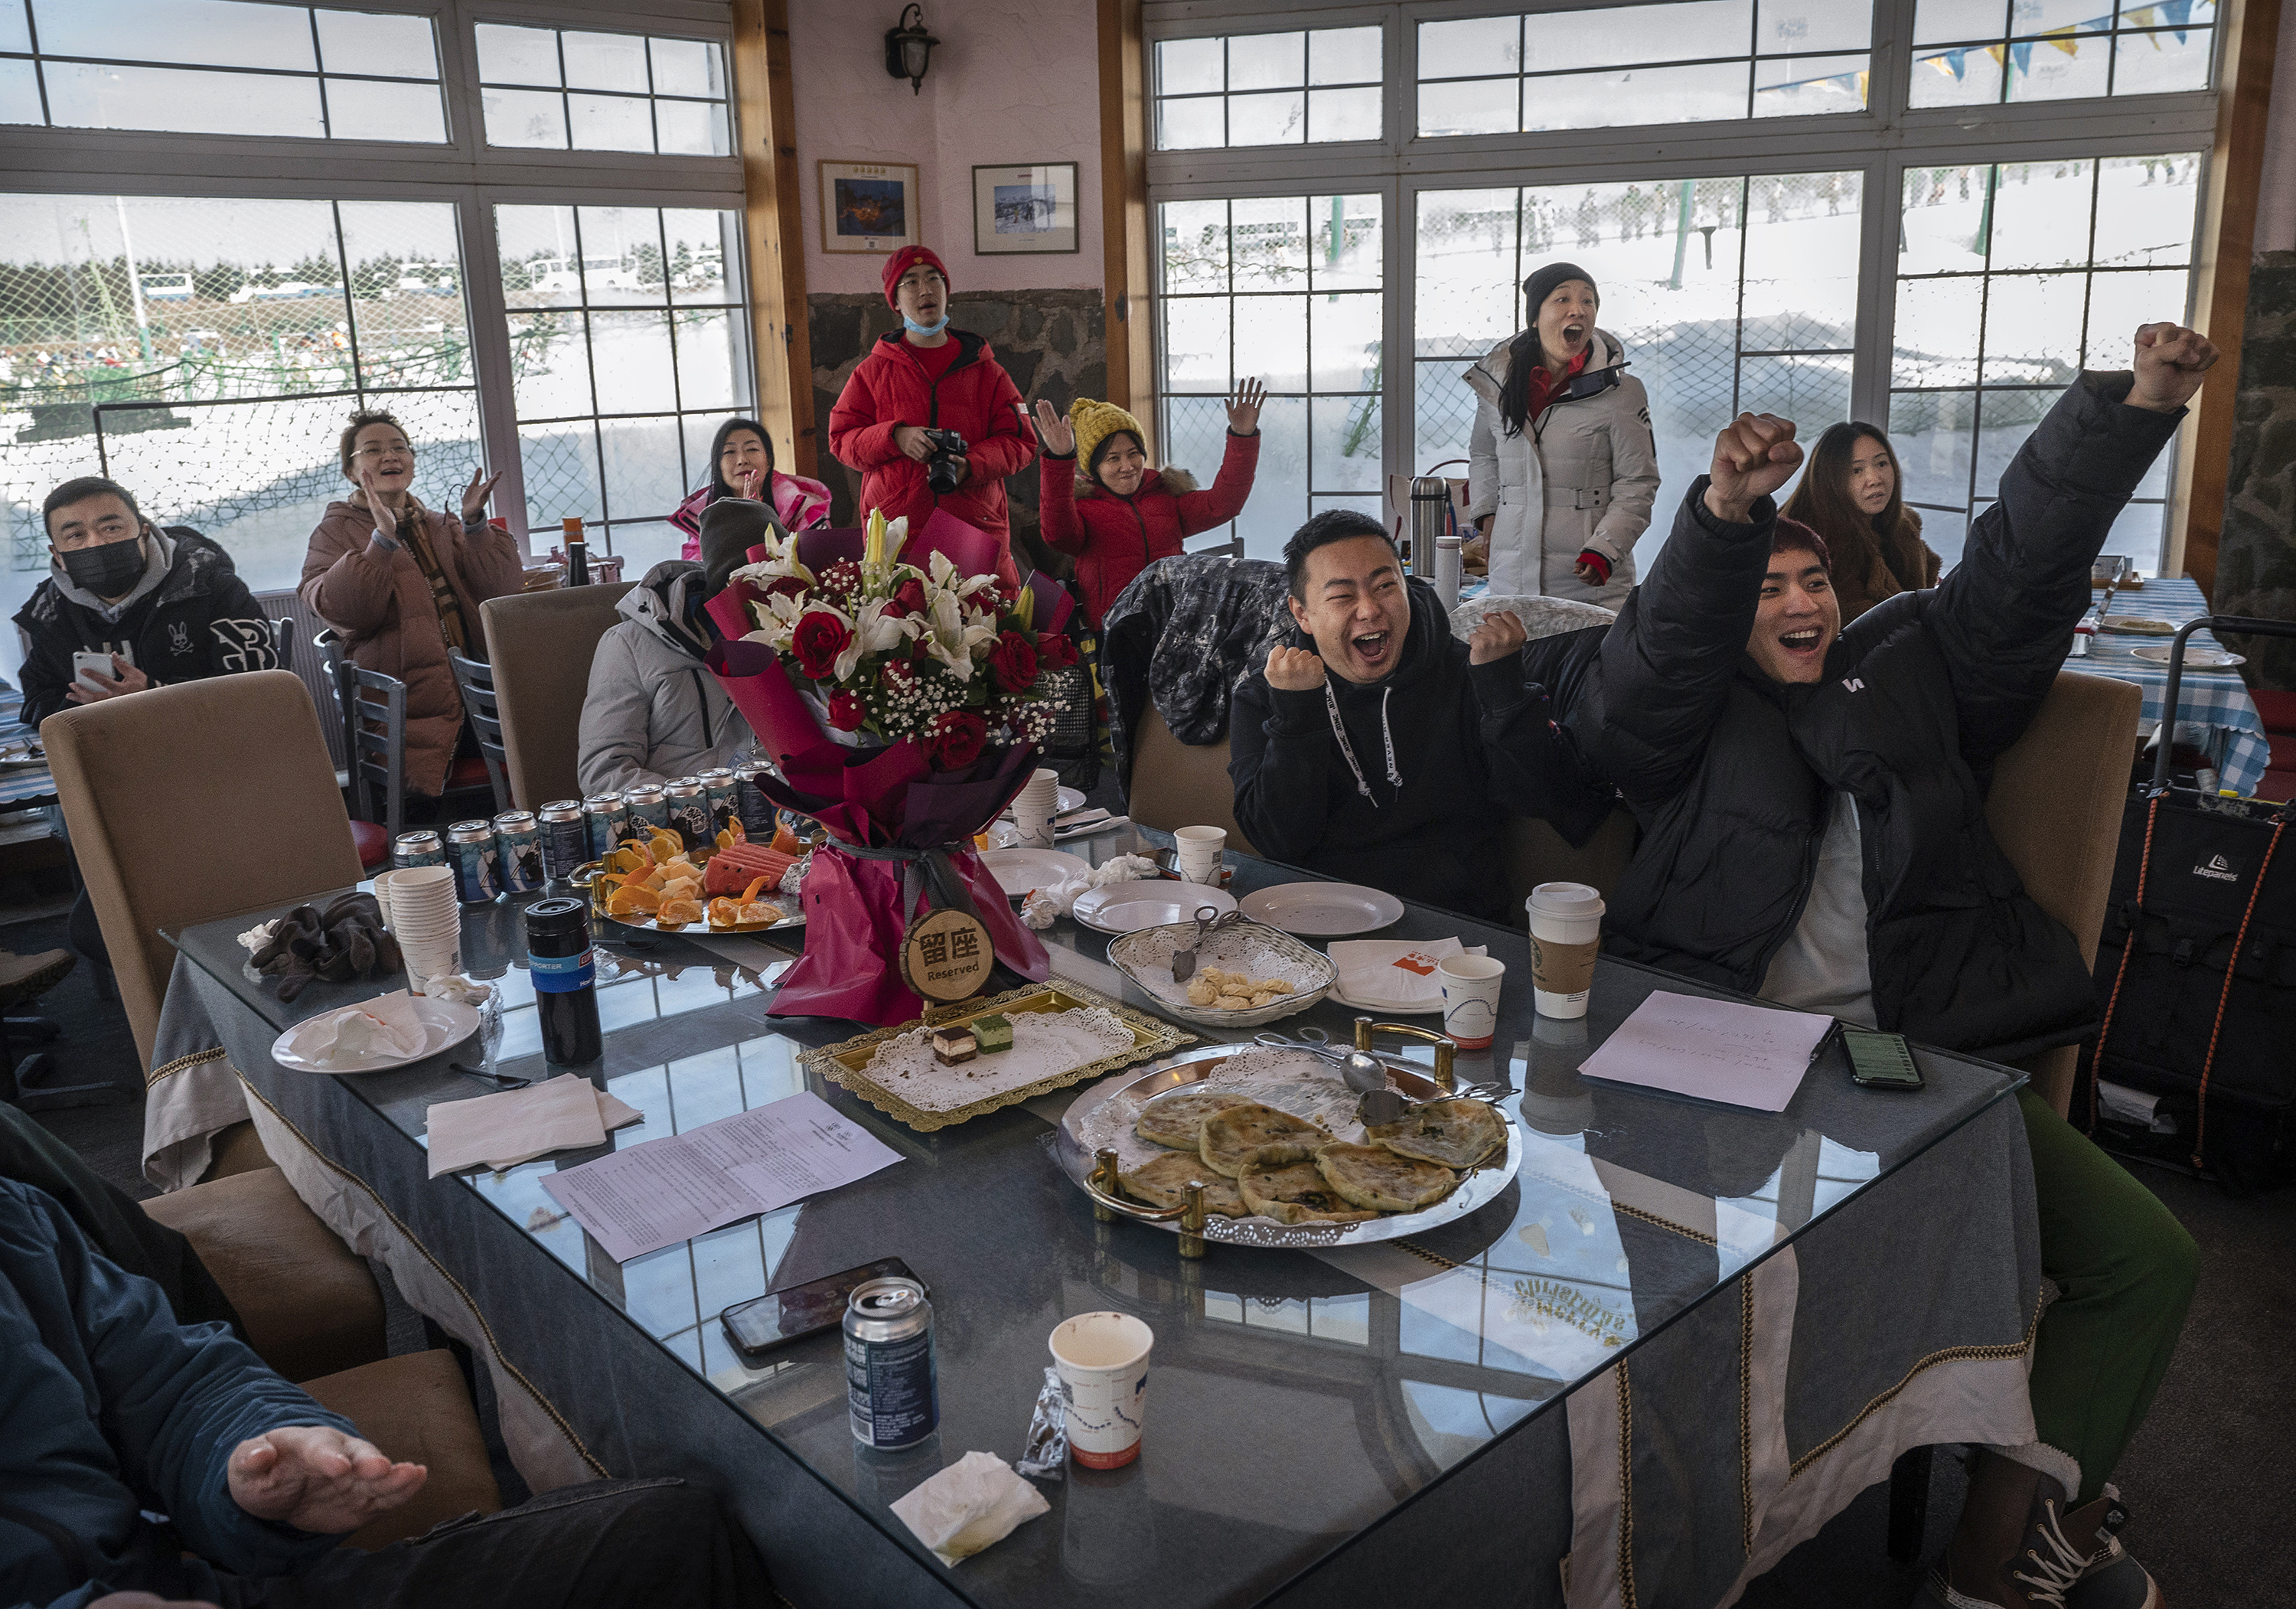 People react as they watch Eileen Gu’s silver medal-winning performance in the slopestyle skiing event on TV on Tuesday in Beijing.